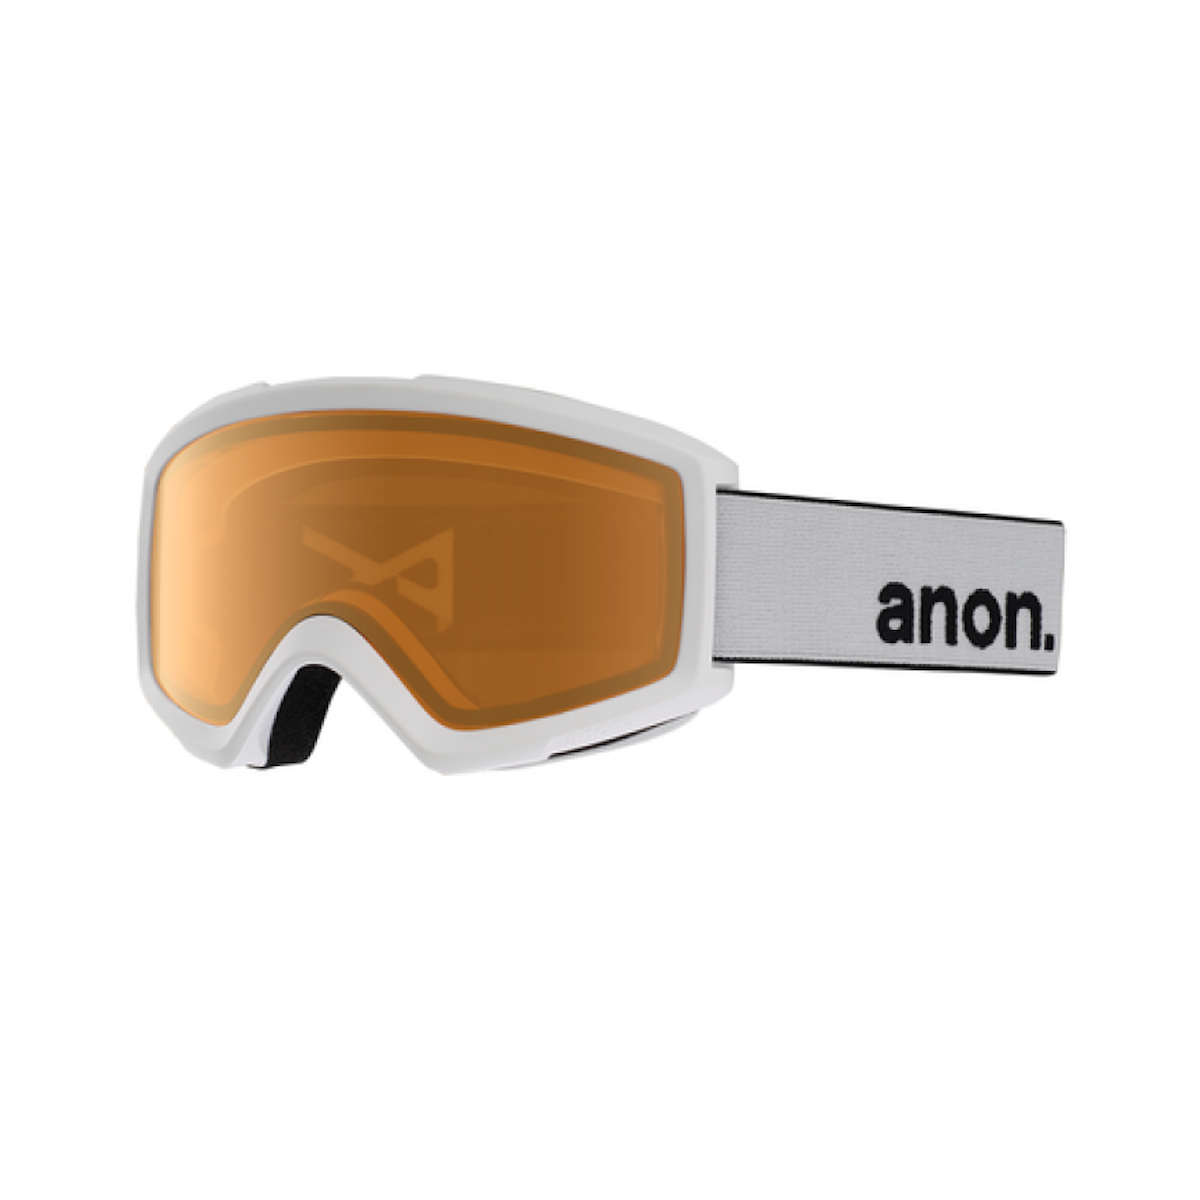 ANON HELIX 2.0 snow goggles - white/amber